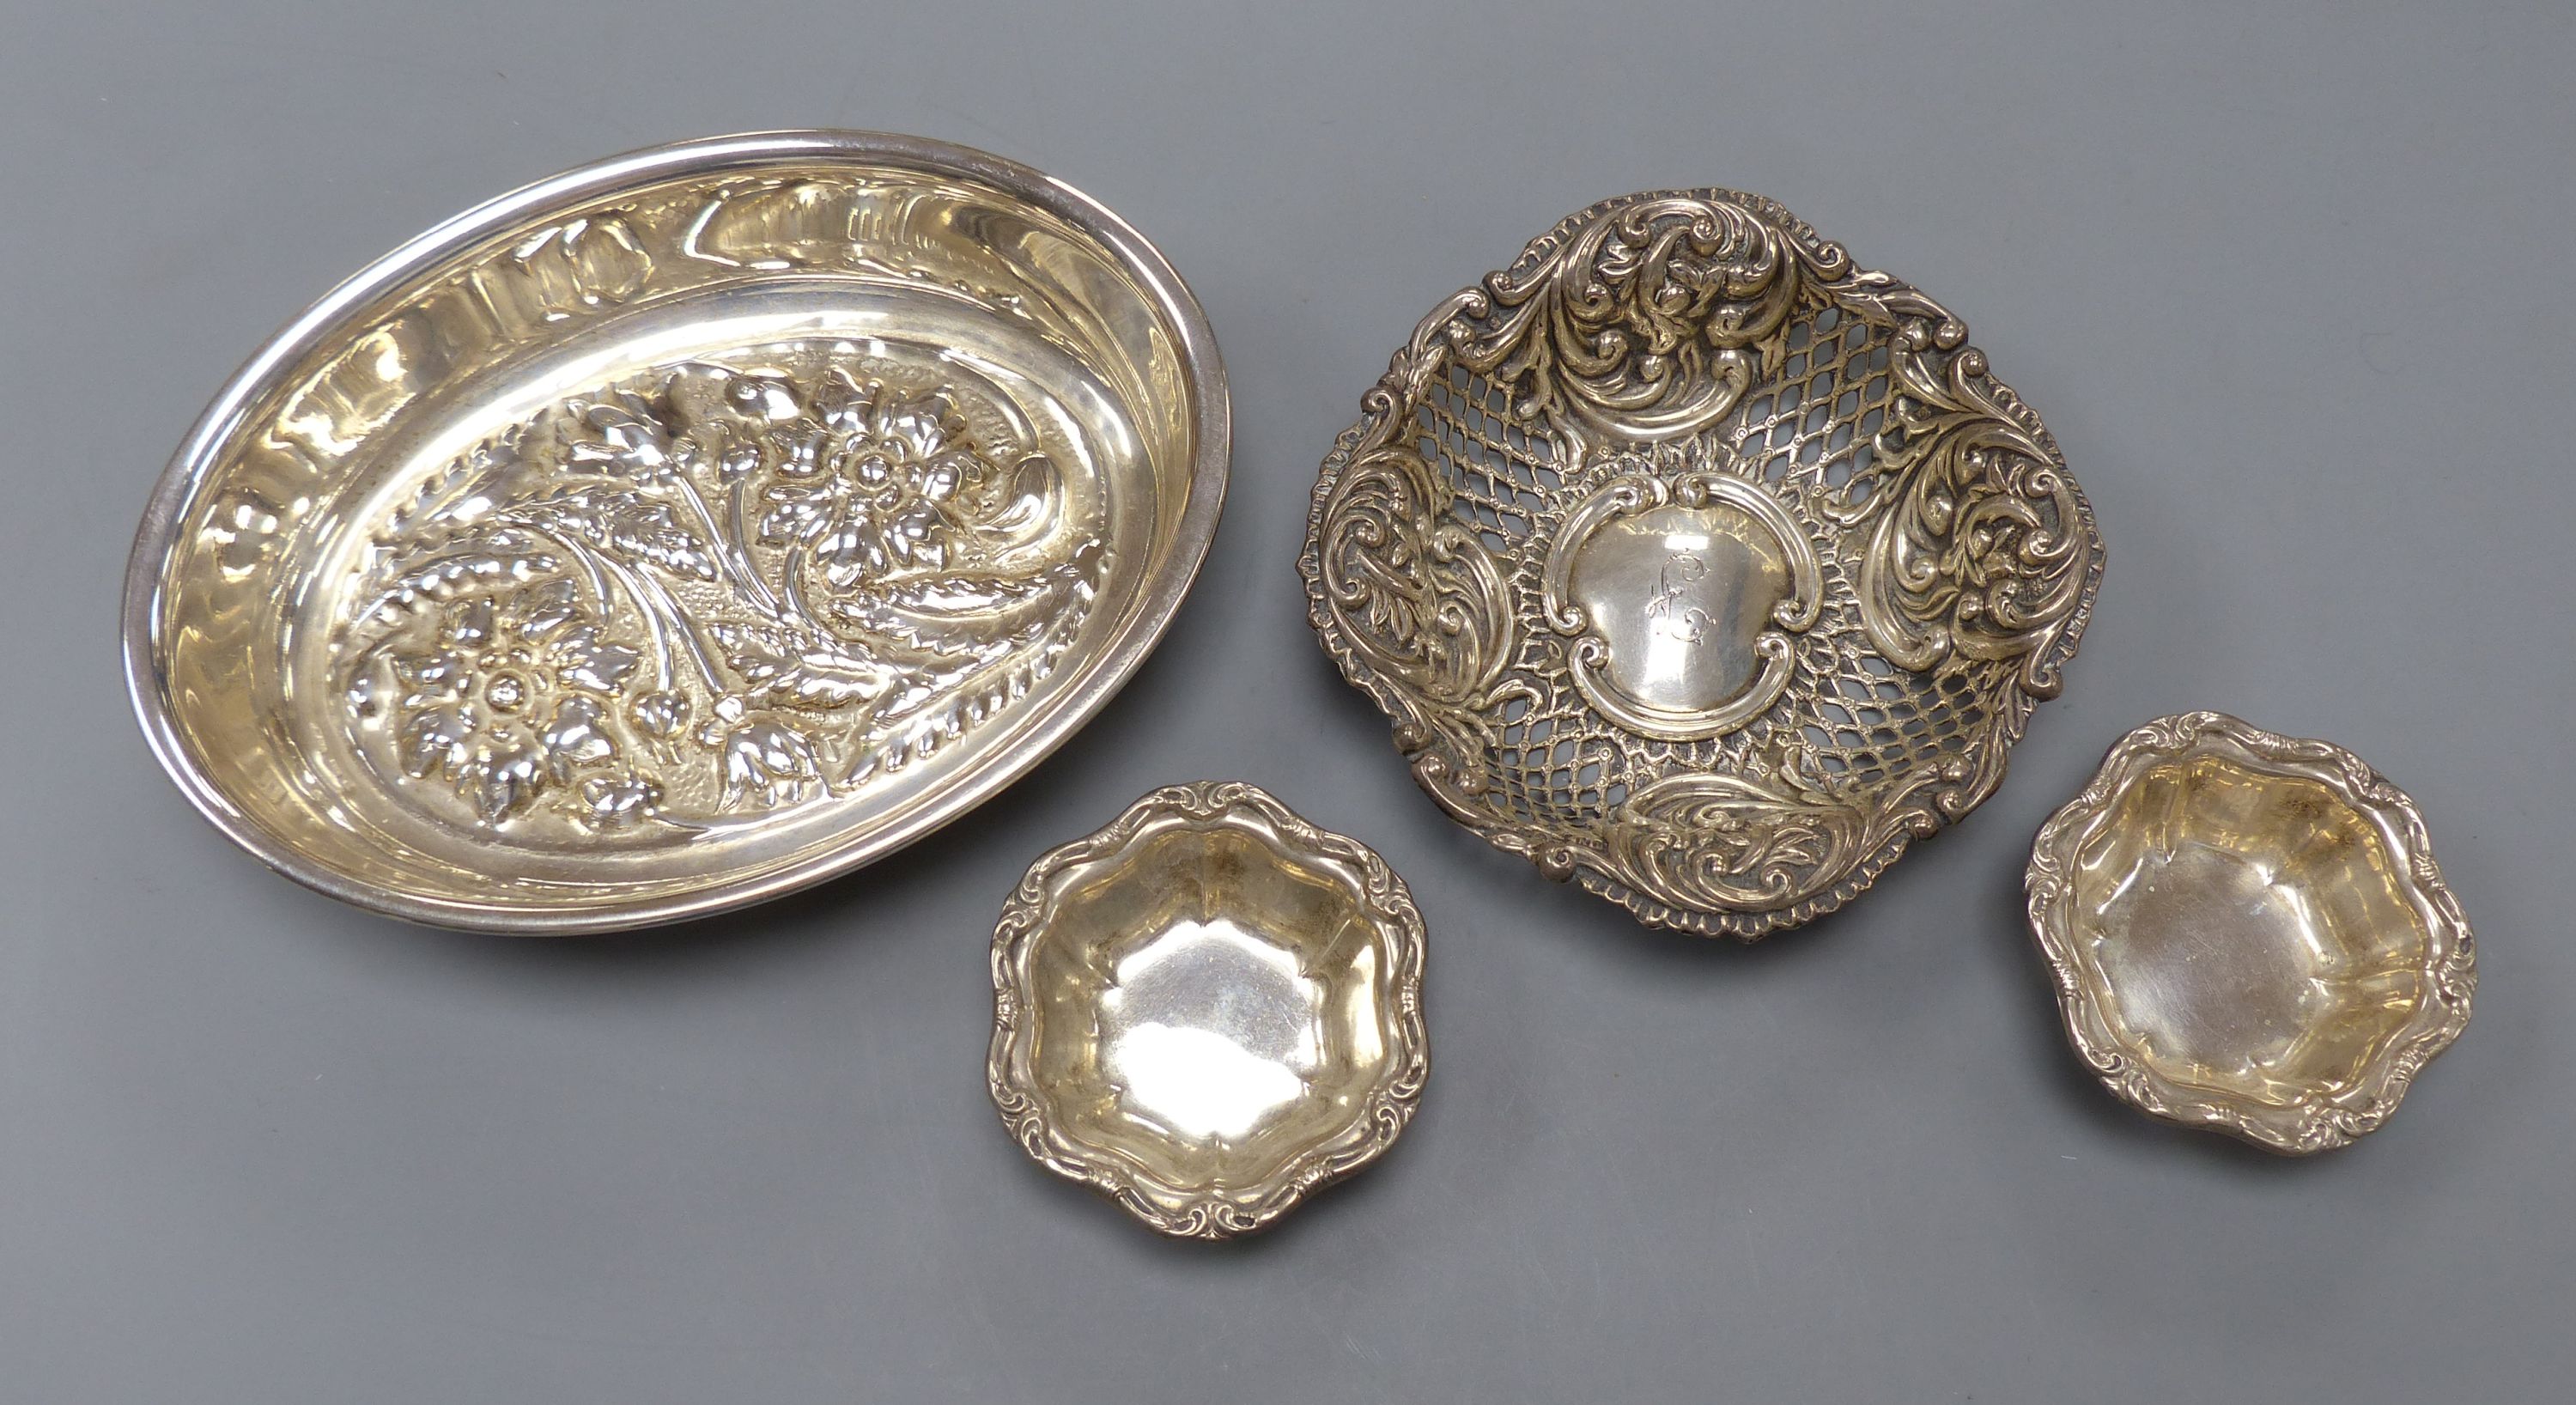 An Italian 8000 standard white metal oval bowl, 15.8cm, two small Birks sterling salts and a repousse silver bonbon dish